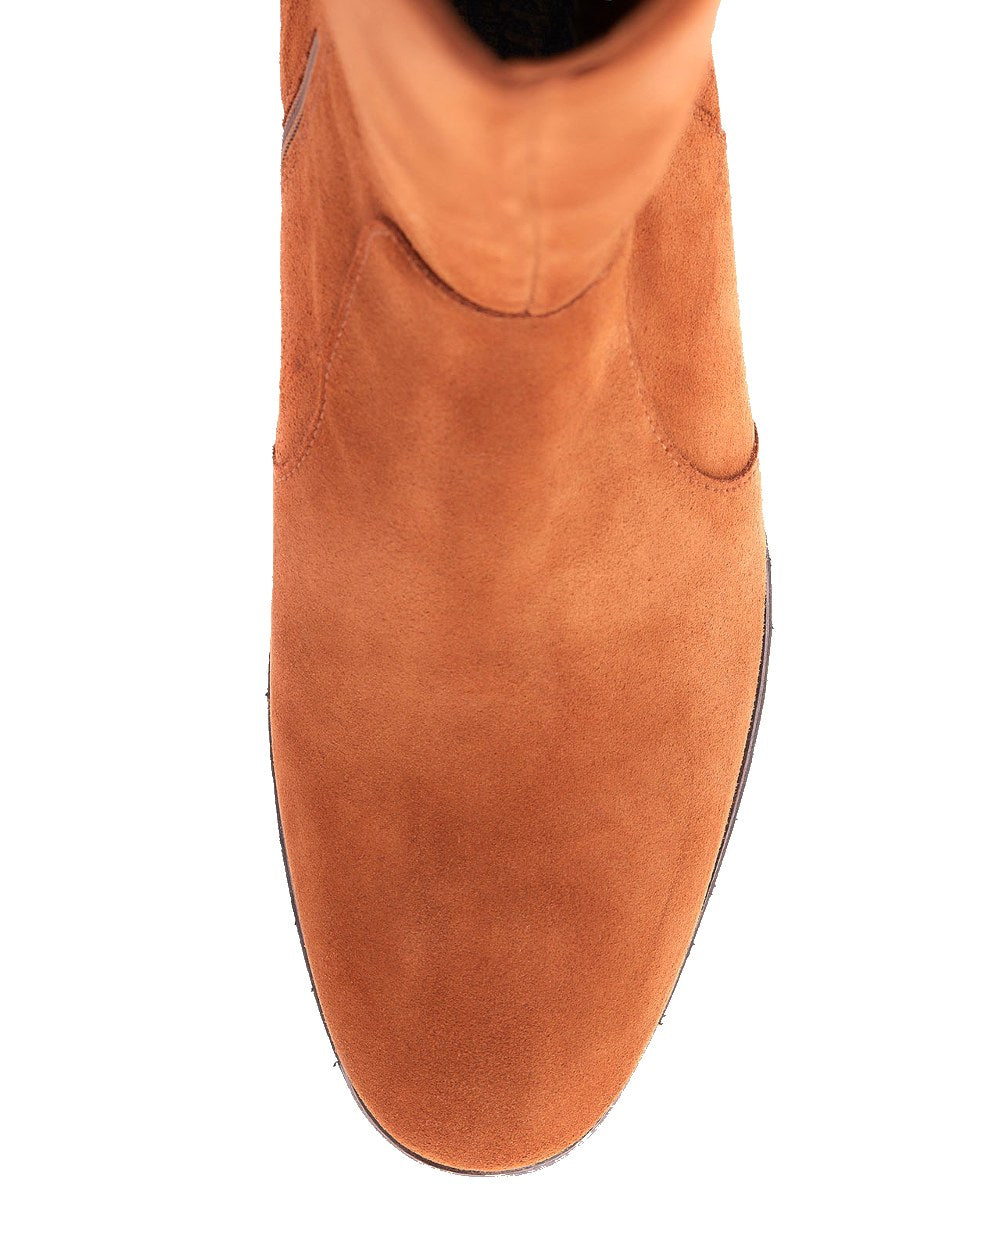 Dubarry Downpatrick Knee High Boots in Camel 